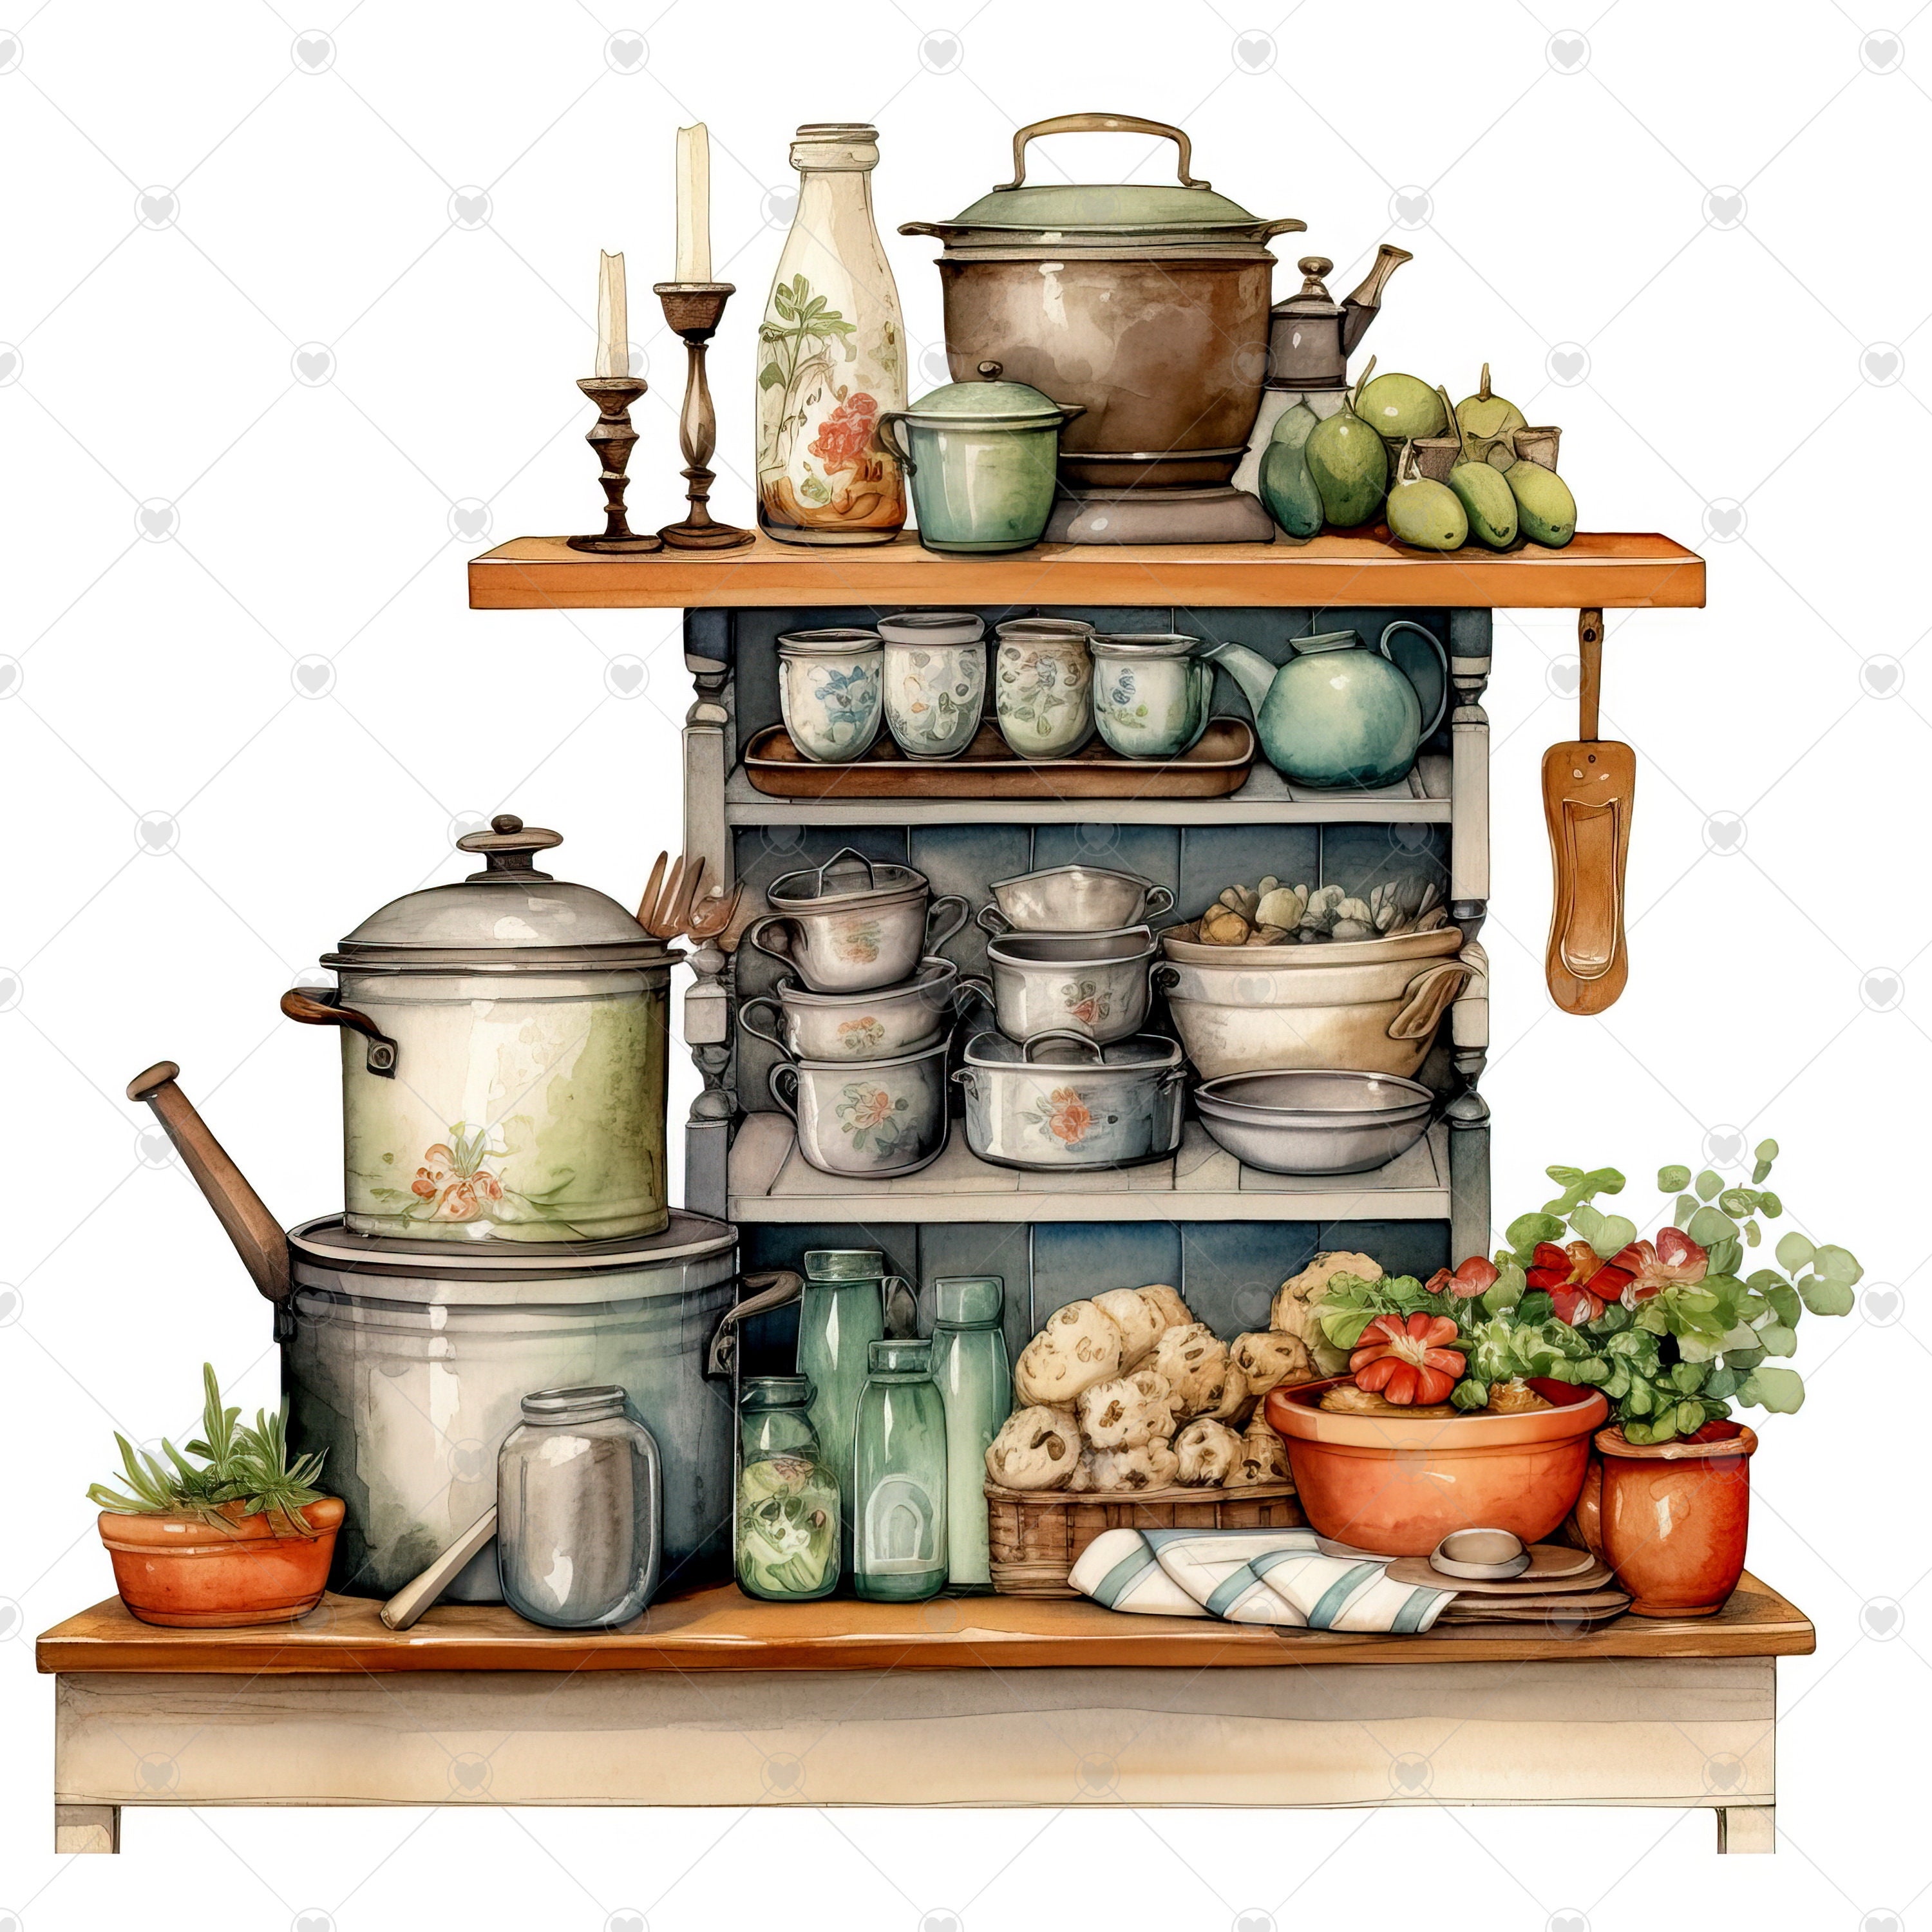 Kitchen Dishes, Vintage Utensils, Watercolor Clipart, Wood Old Things,  Wooden Cupboard, Coffee Pot, Kettle, Bakeware, Milkman, Digital PNG 